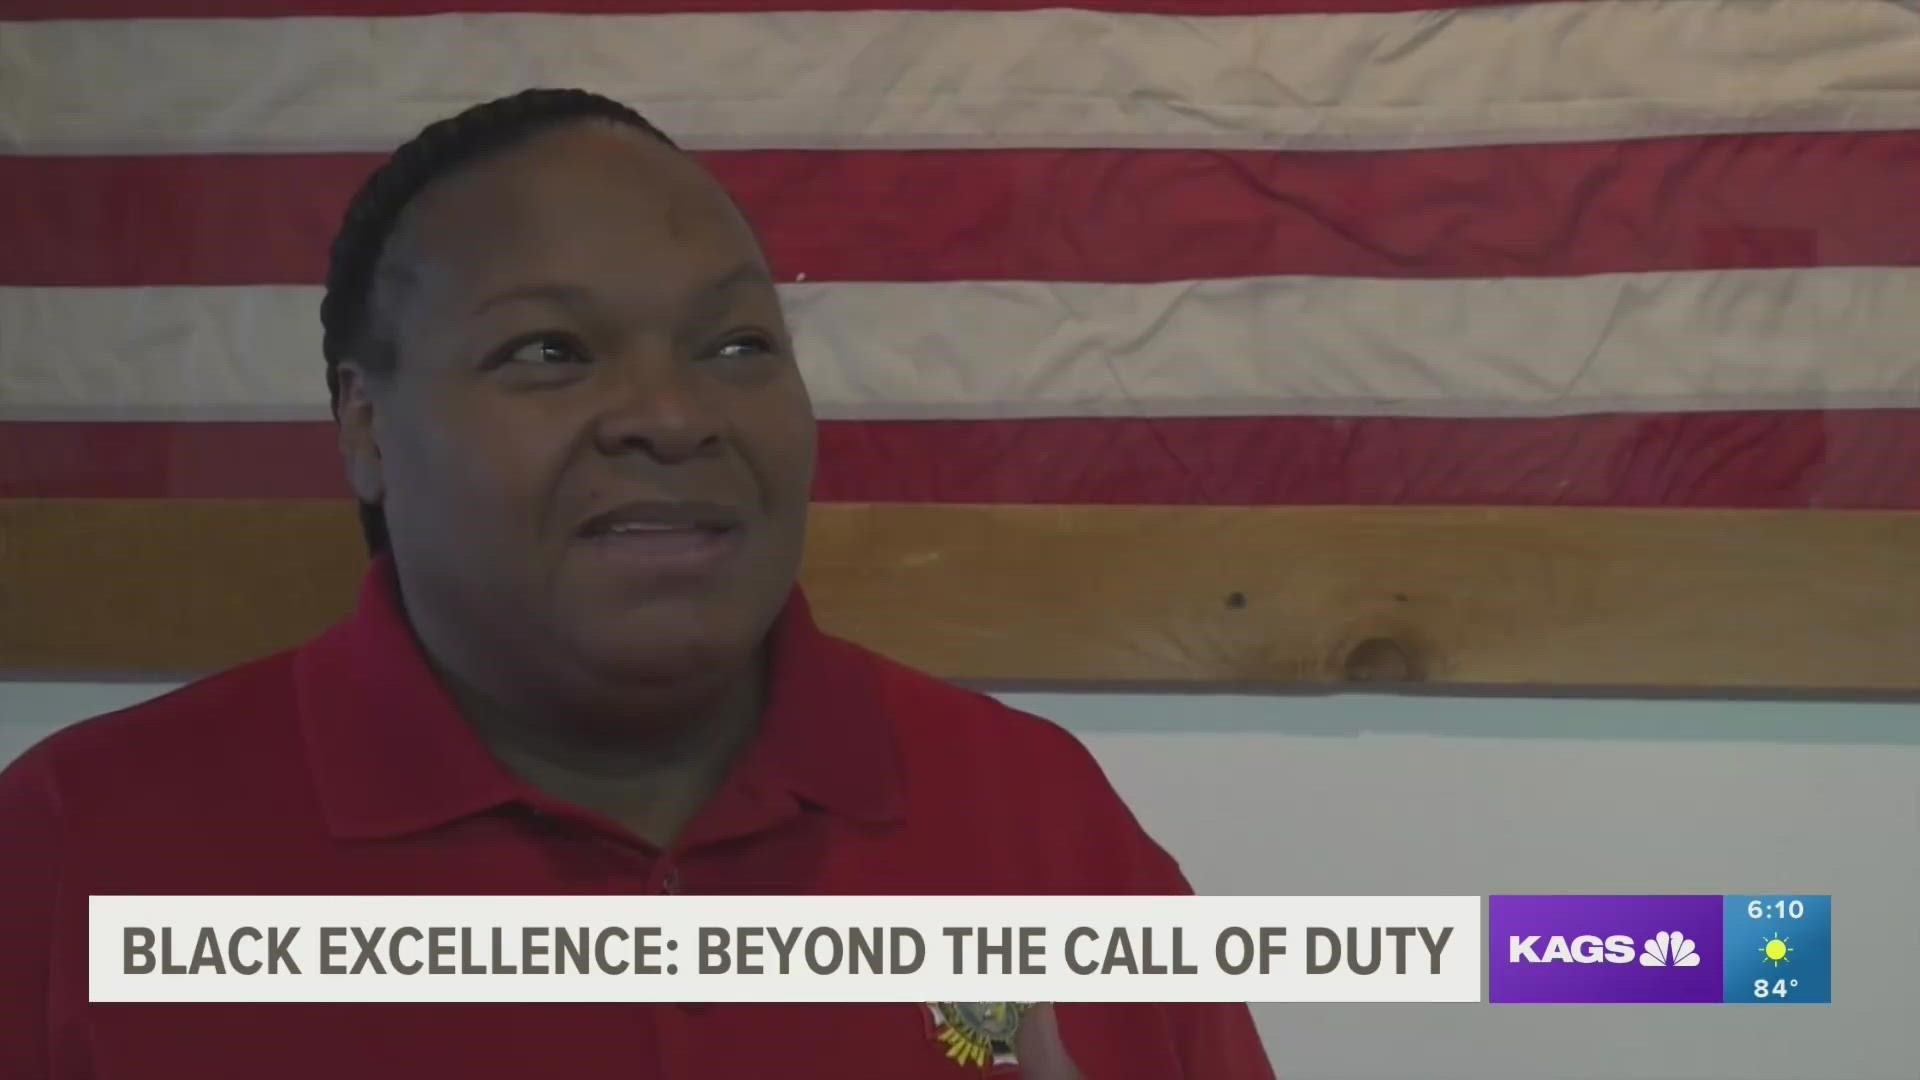 Quartermaster and Bryan Veteran at VFW Post 4692 Joanetta Carter has devoted her life to serving others even after her active duty service has ended.